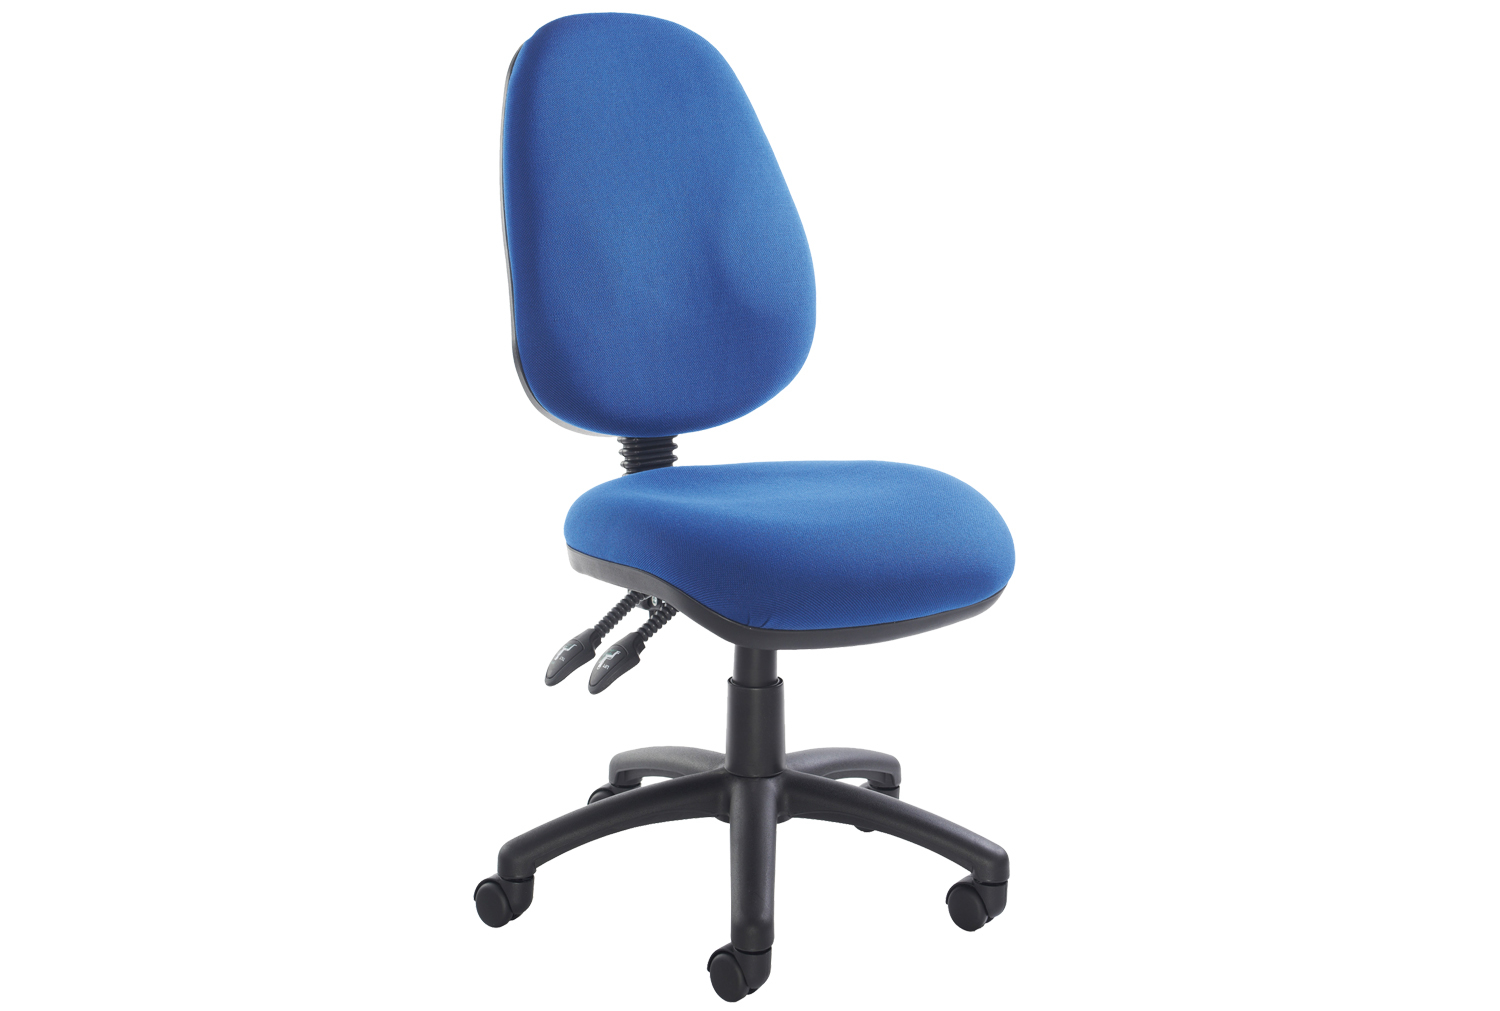 Full Lumbar 2 Lever Operator Office Chair No Arms, Blue, Express Delivery